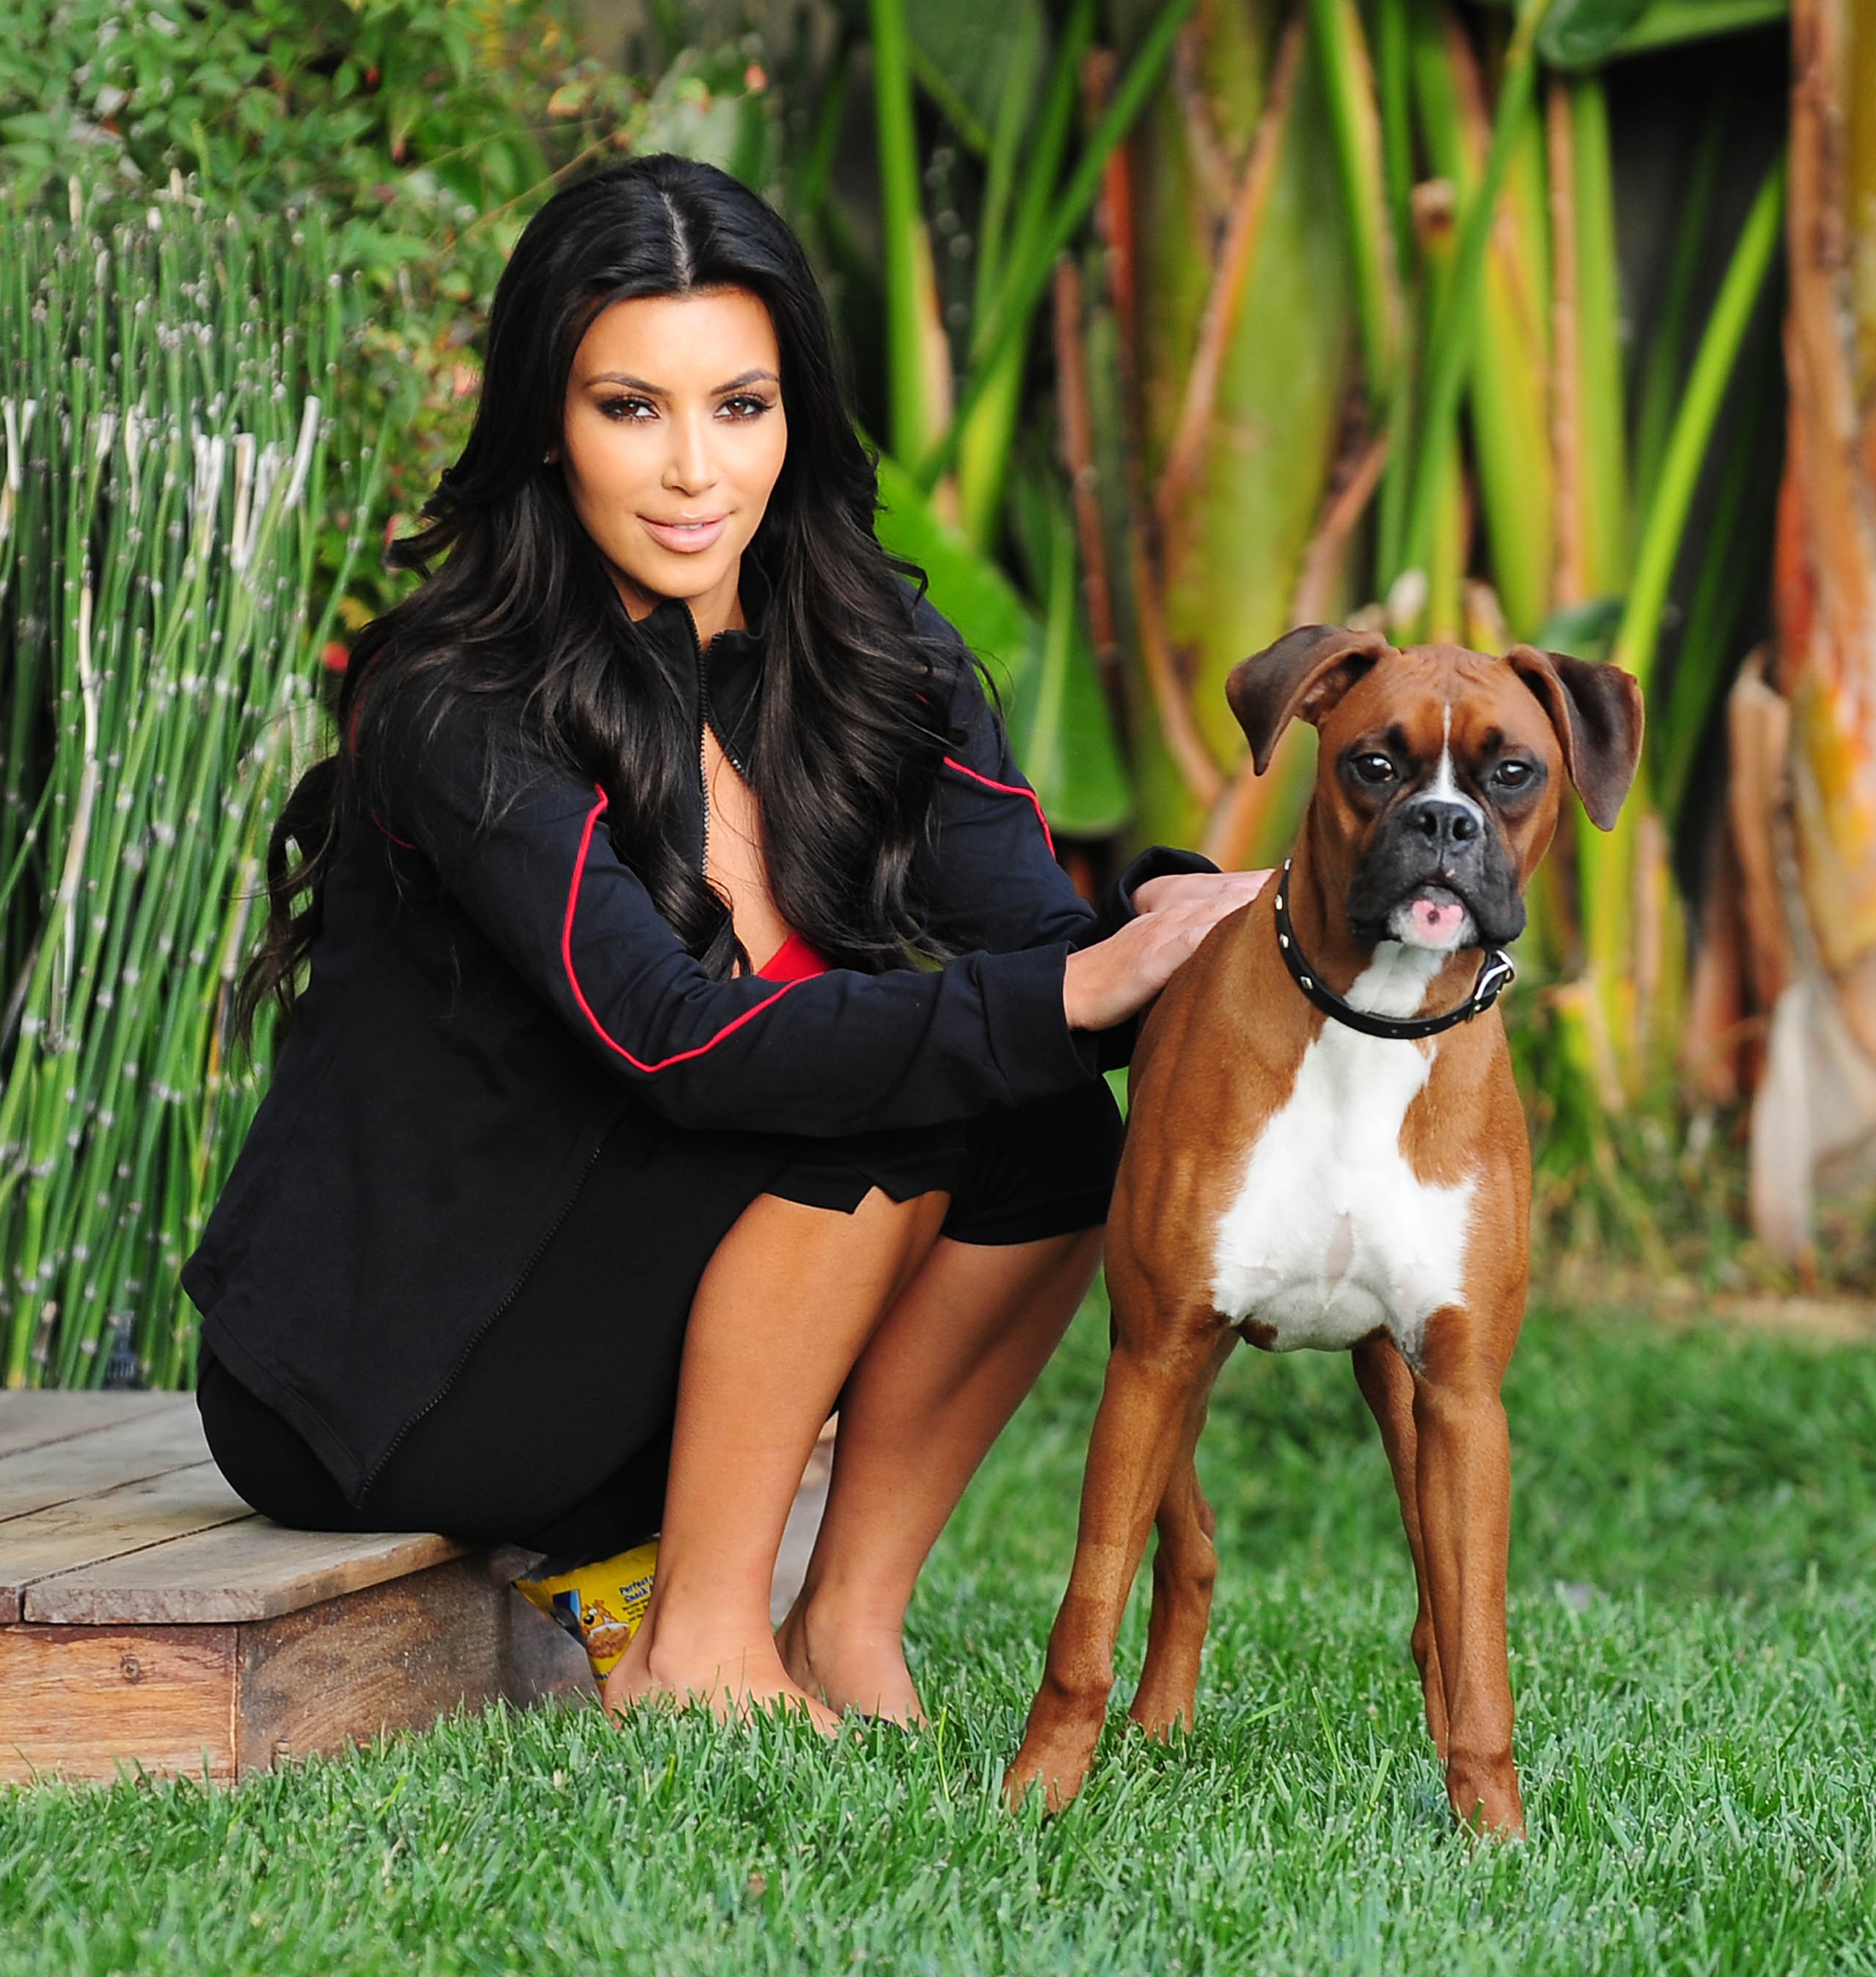 Kim's dog appeared on an early episode of Keeping Up With the Kardashians